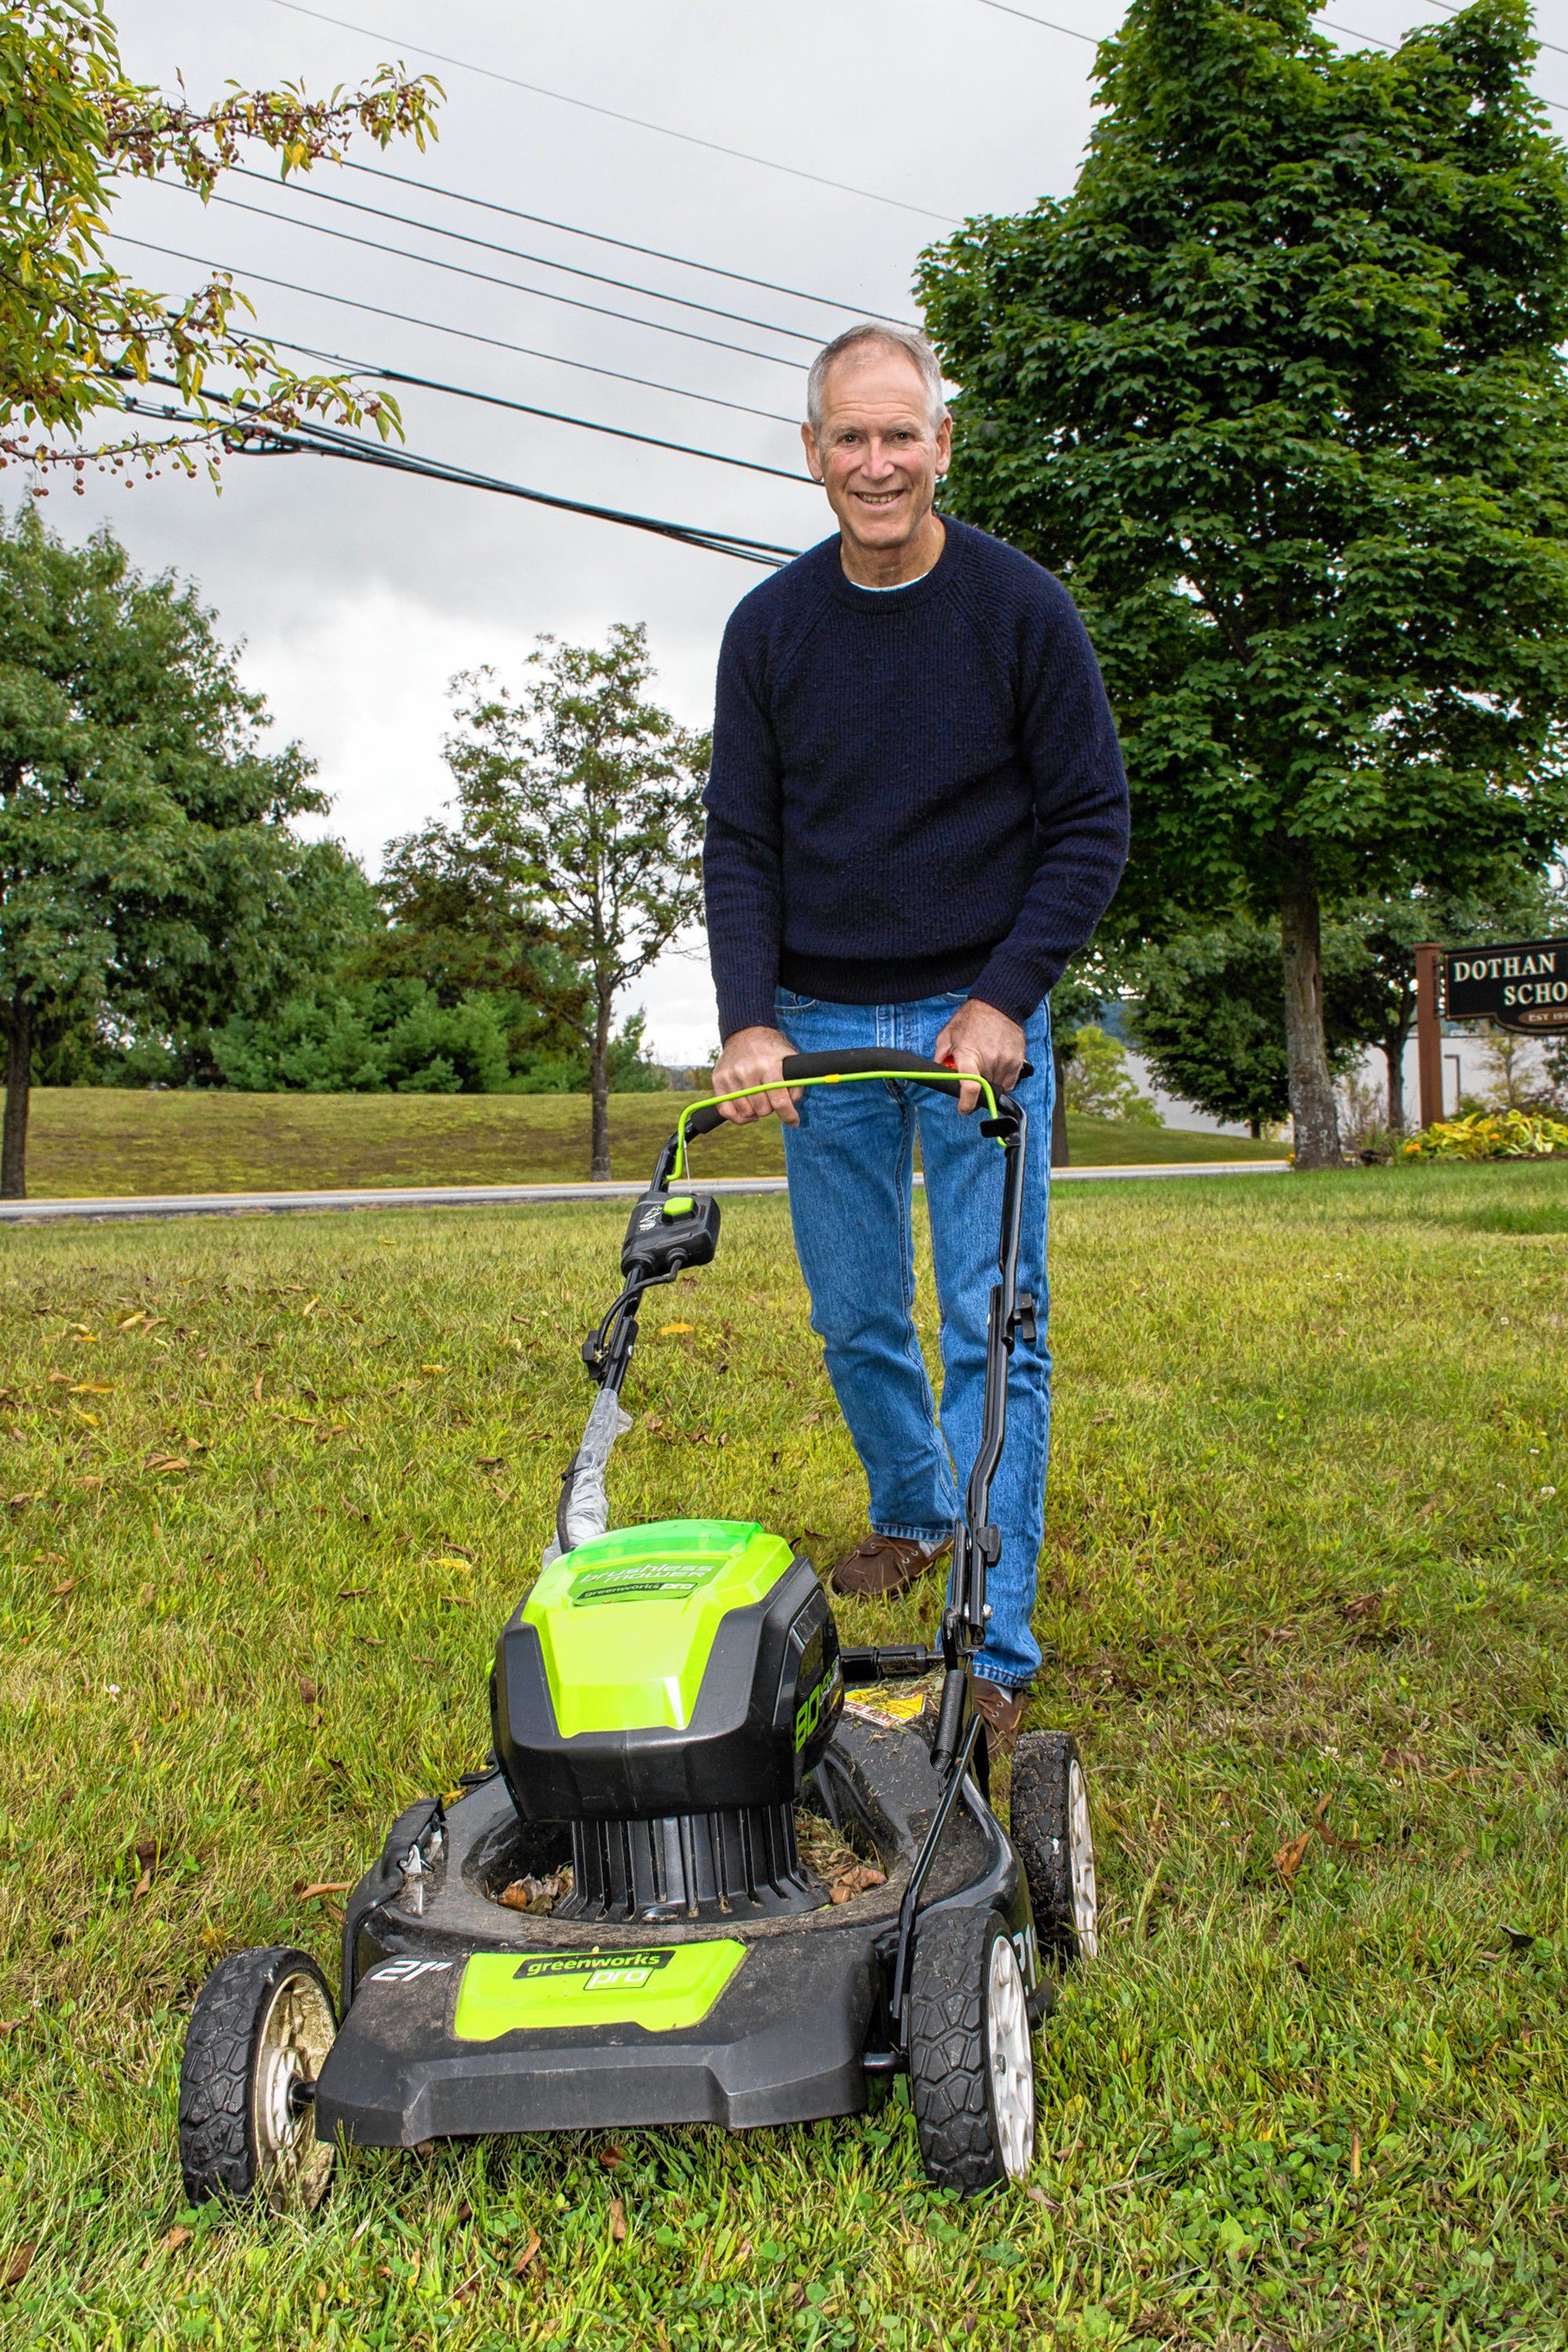 Jamie Hess, a member of the New London (N.H.) Energy Committee, shows off his electric lawnmower on display at the second annual Upper Valley Electric Vehicle Expo on Sept. 9 at Dothan Brook School in Hartford, Vt. (Nancy Nutile-McMenemy photograph)